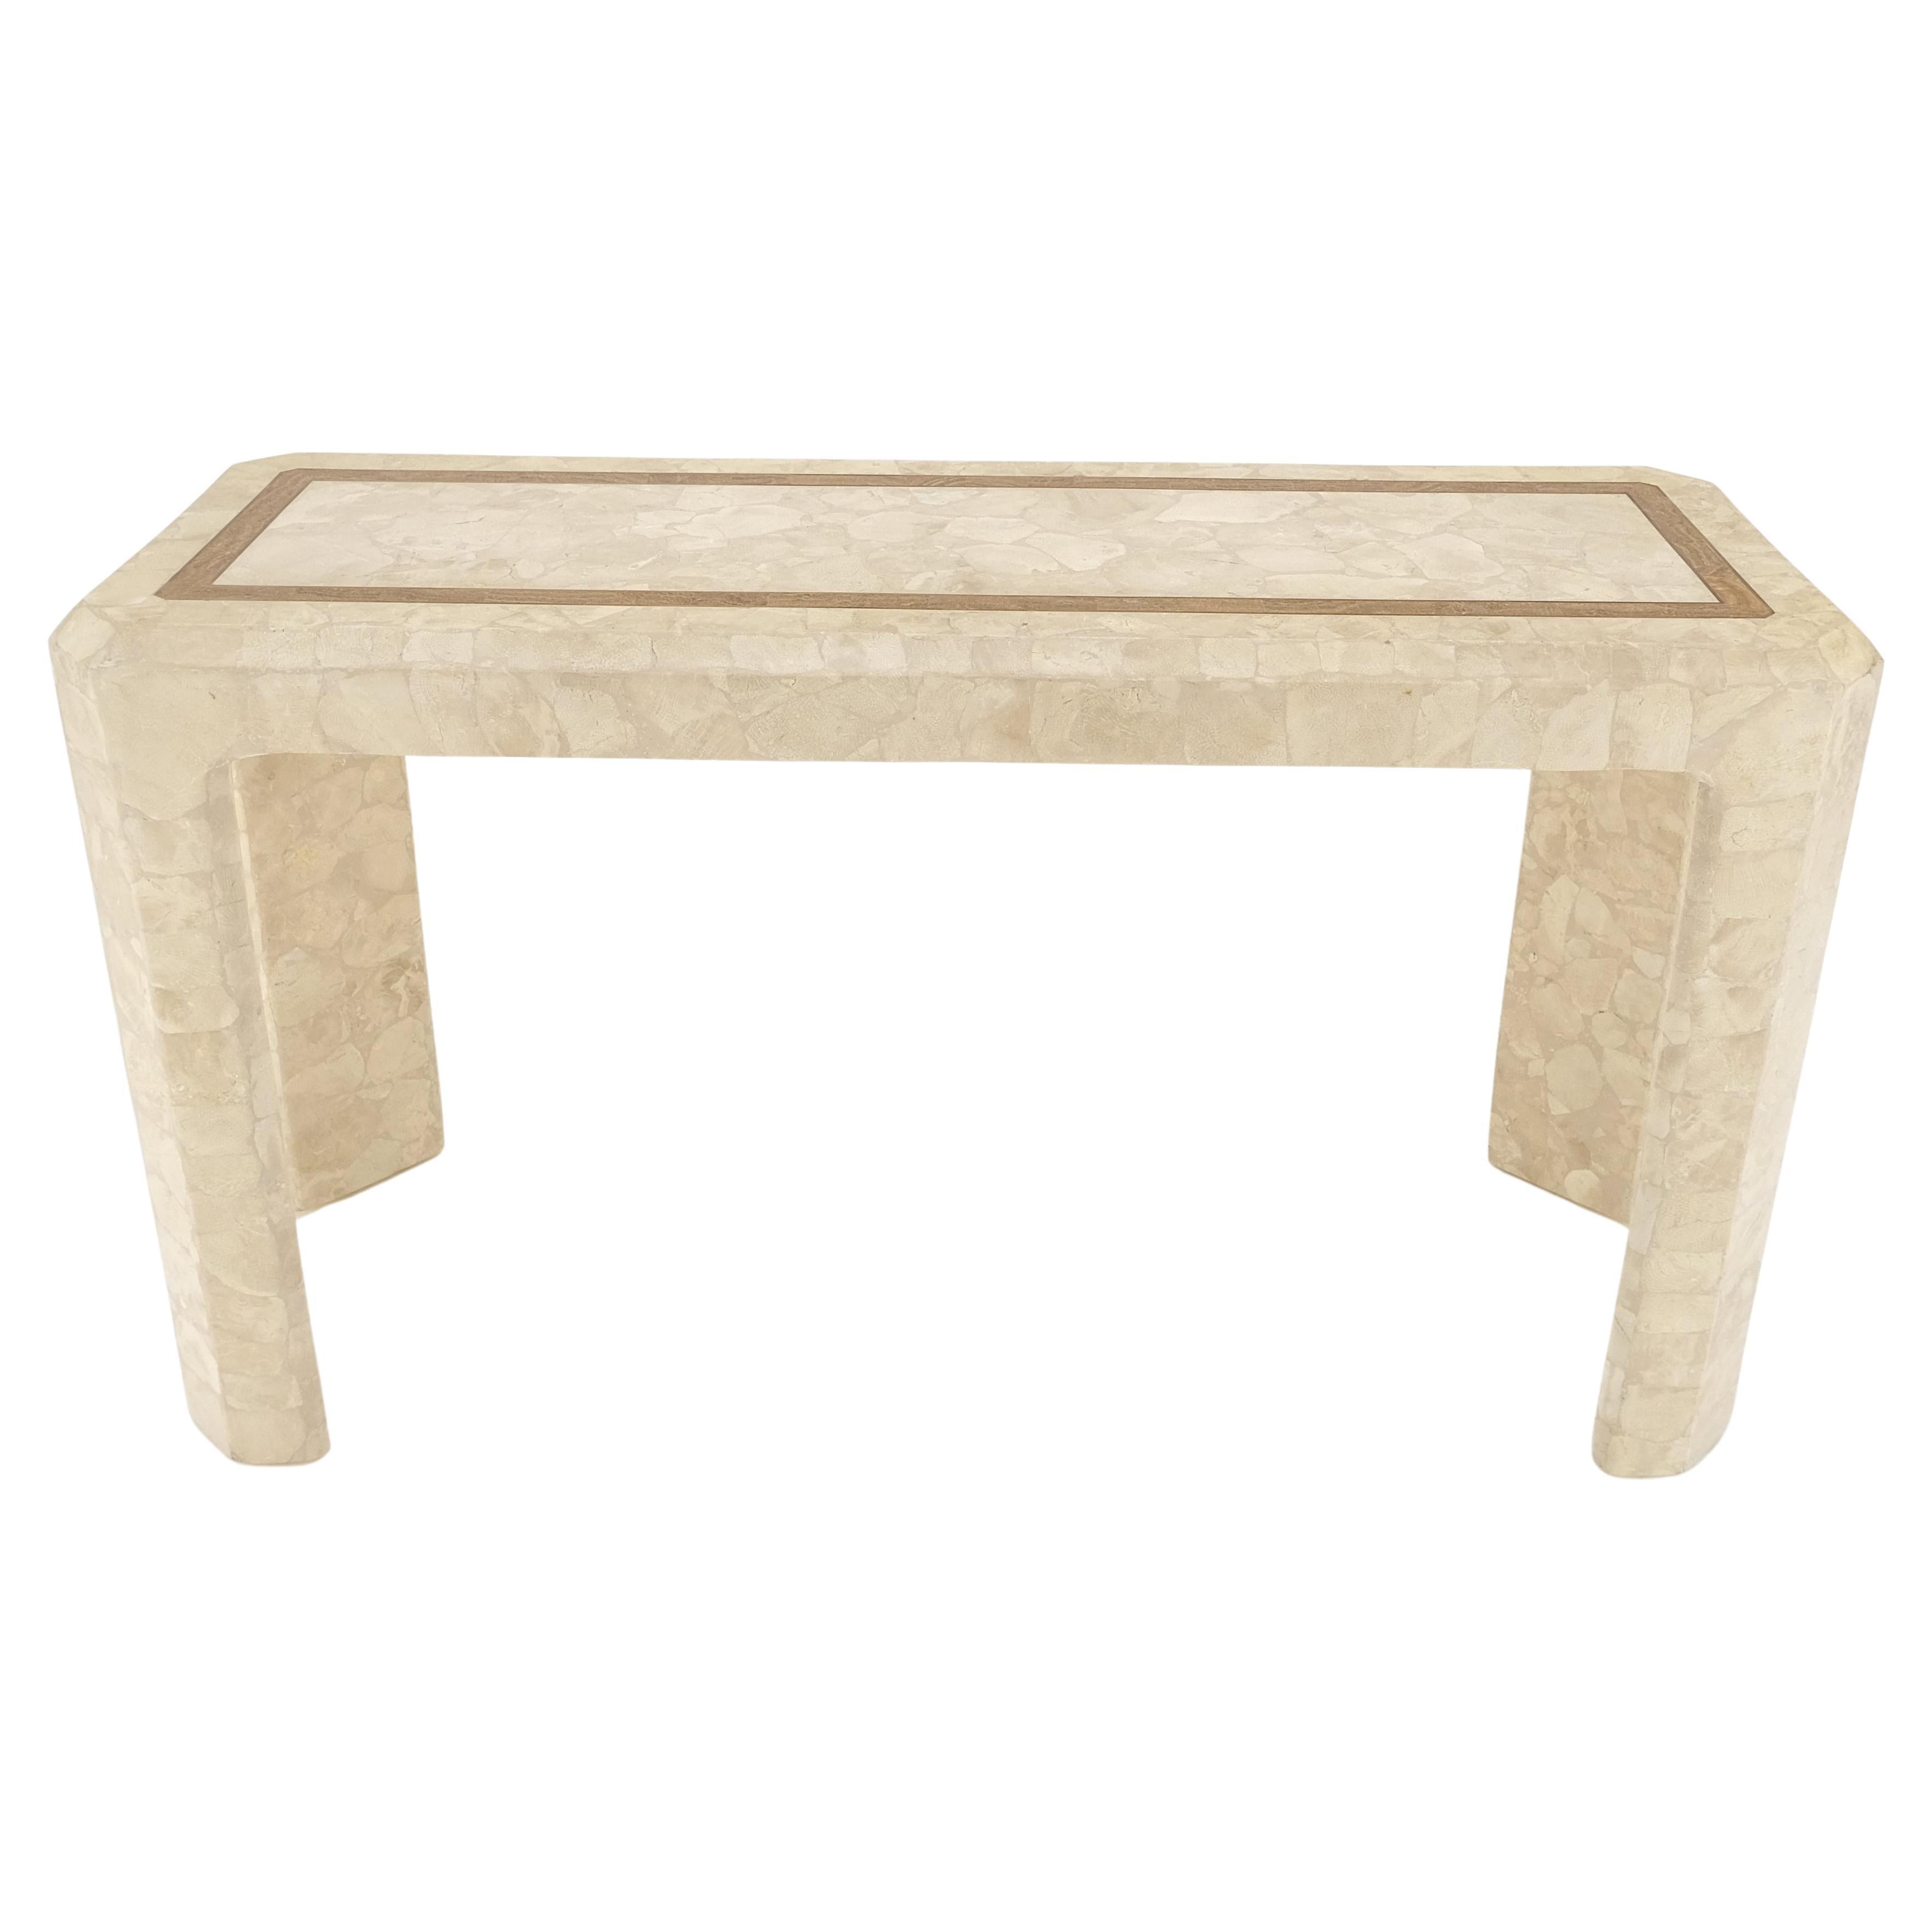 Tessellated Travertine Inlayed Top Console Sofa Table Mid Century Modern MINT!